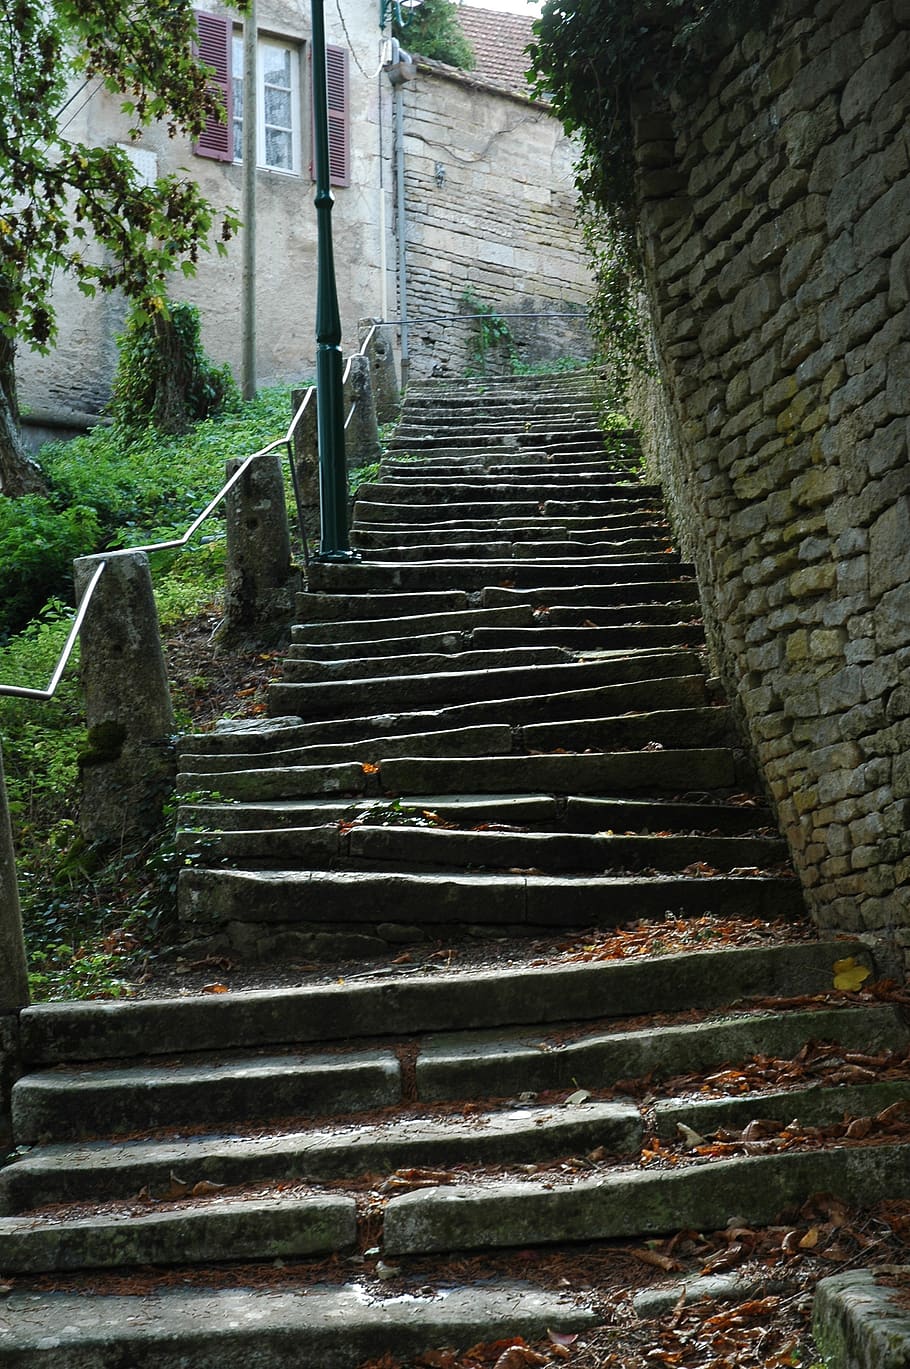 stairs, steep, gradually, rise, village, stair step, stone, railing, architecture, built structure